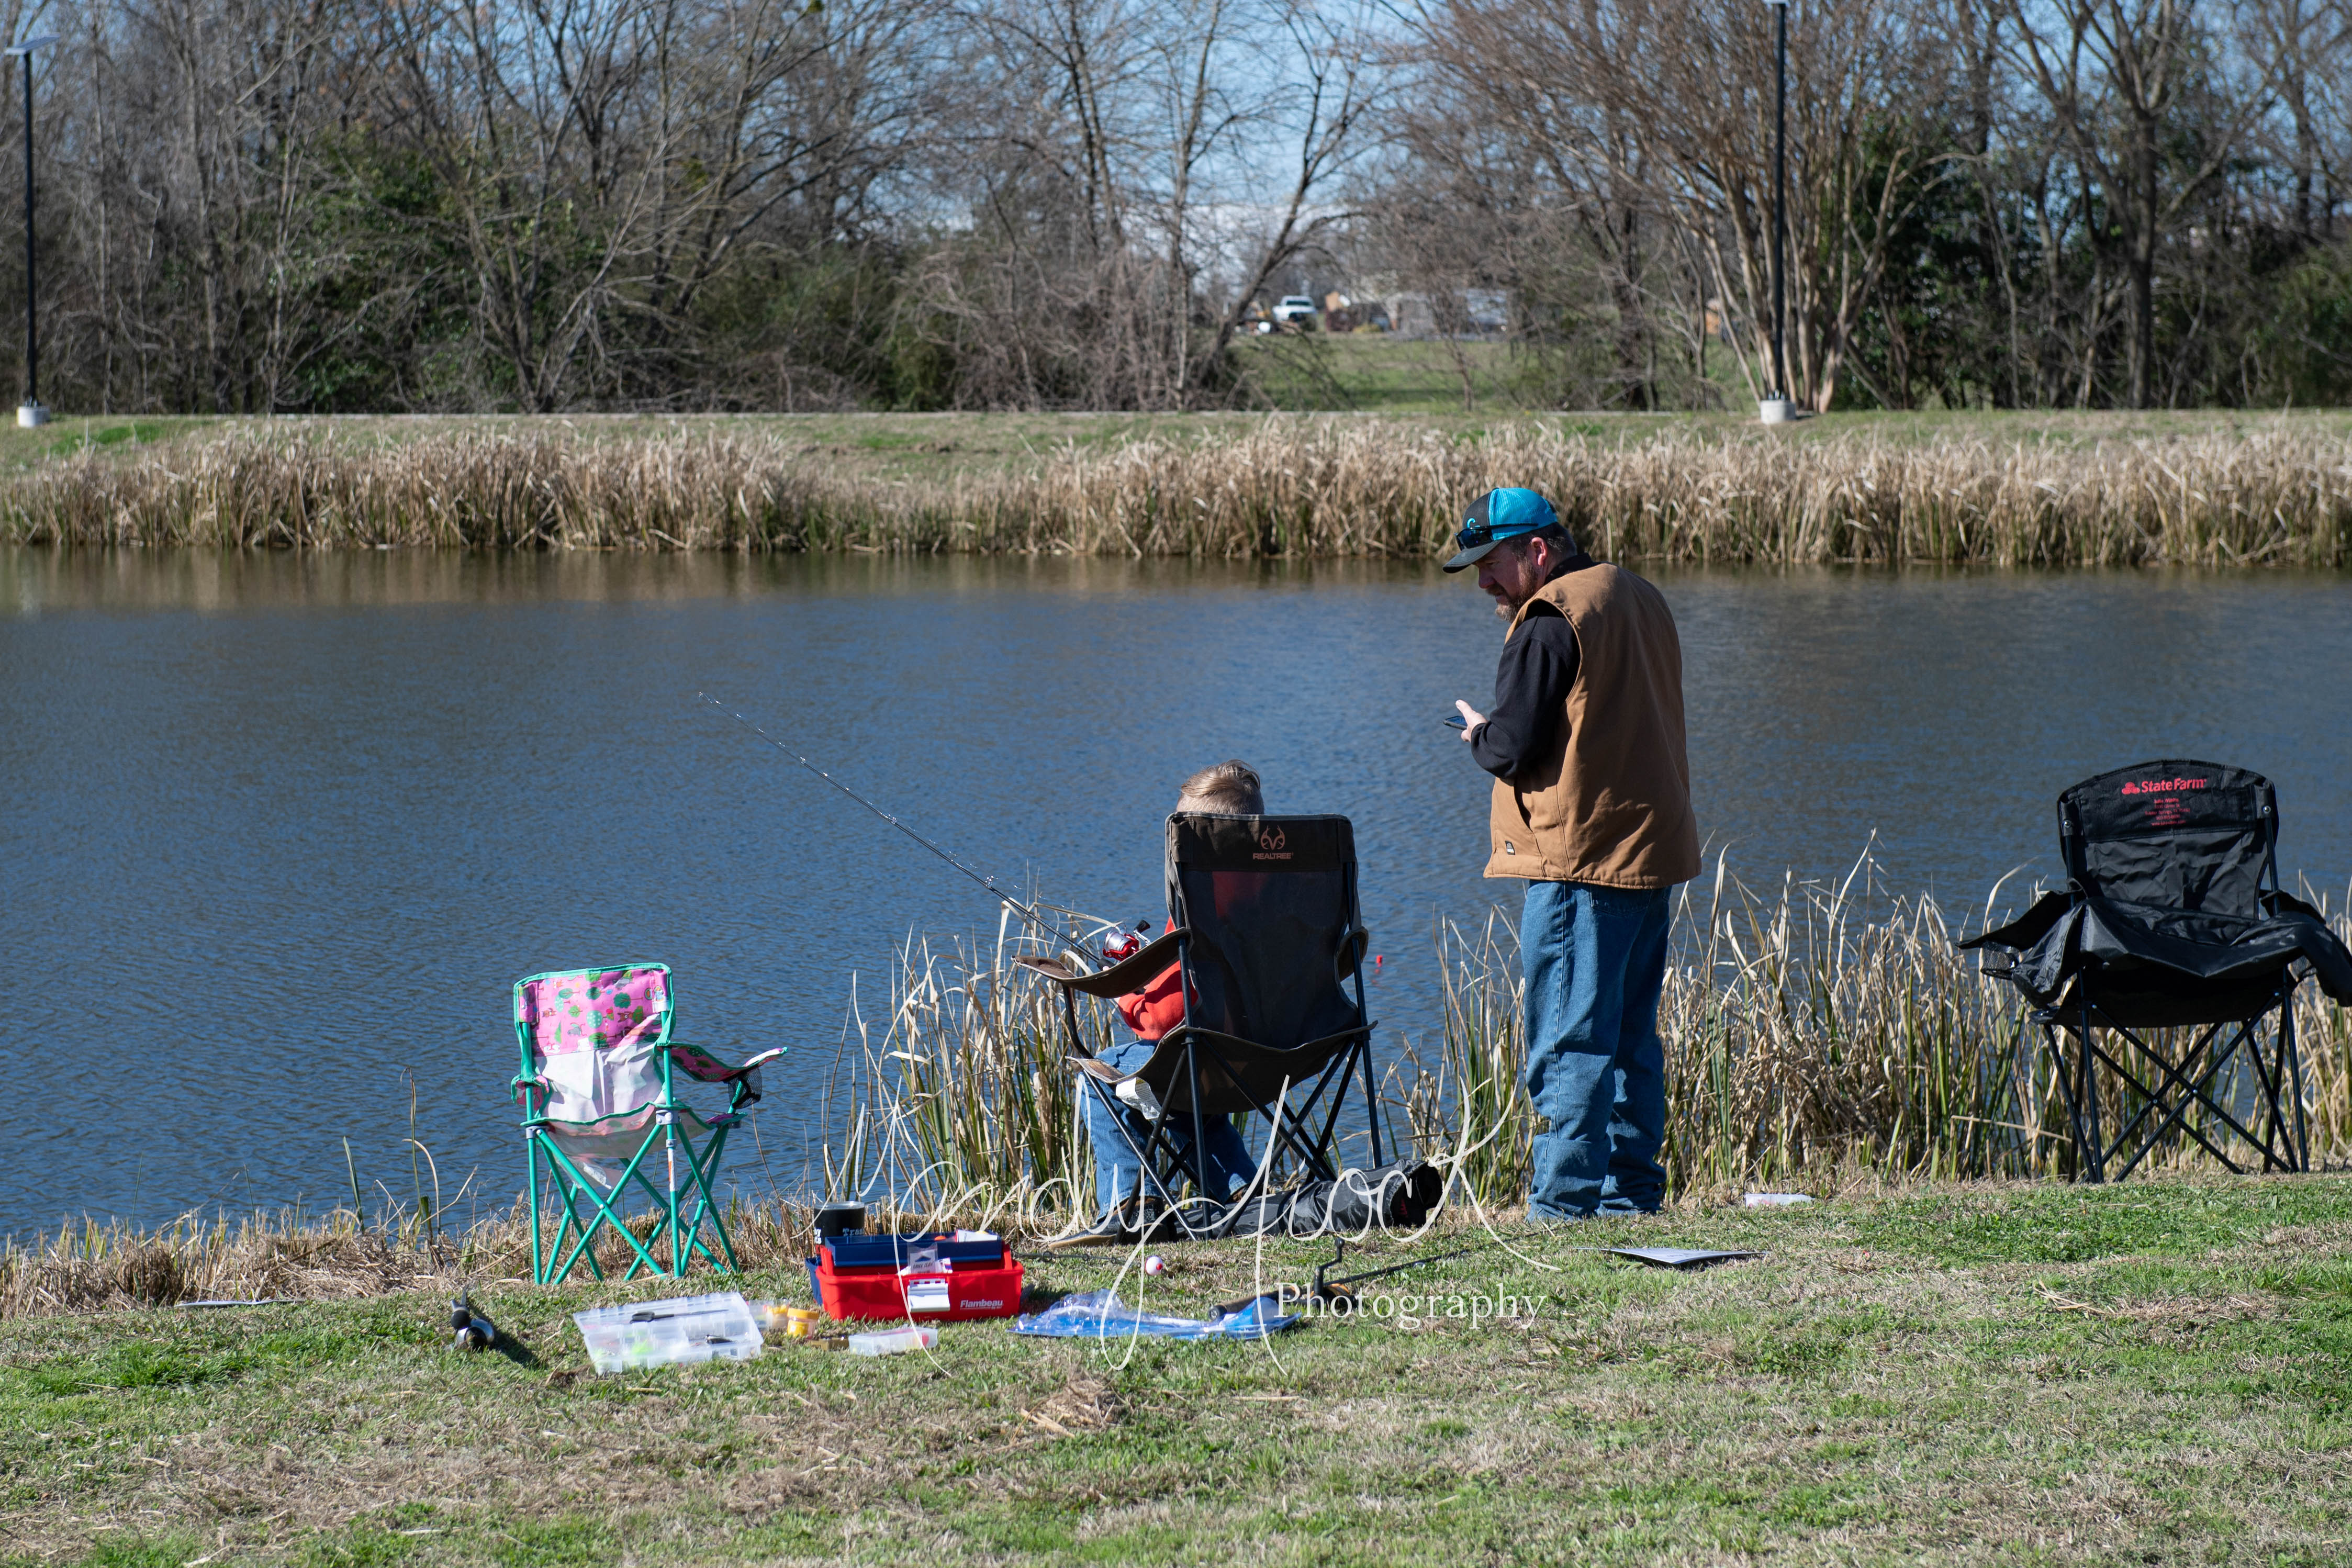 Photos from last weekend’s Larry Buster Memorial Kids Trout Fish Day by Mandy Fiock Photography!